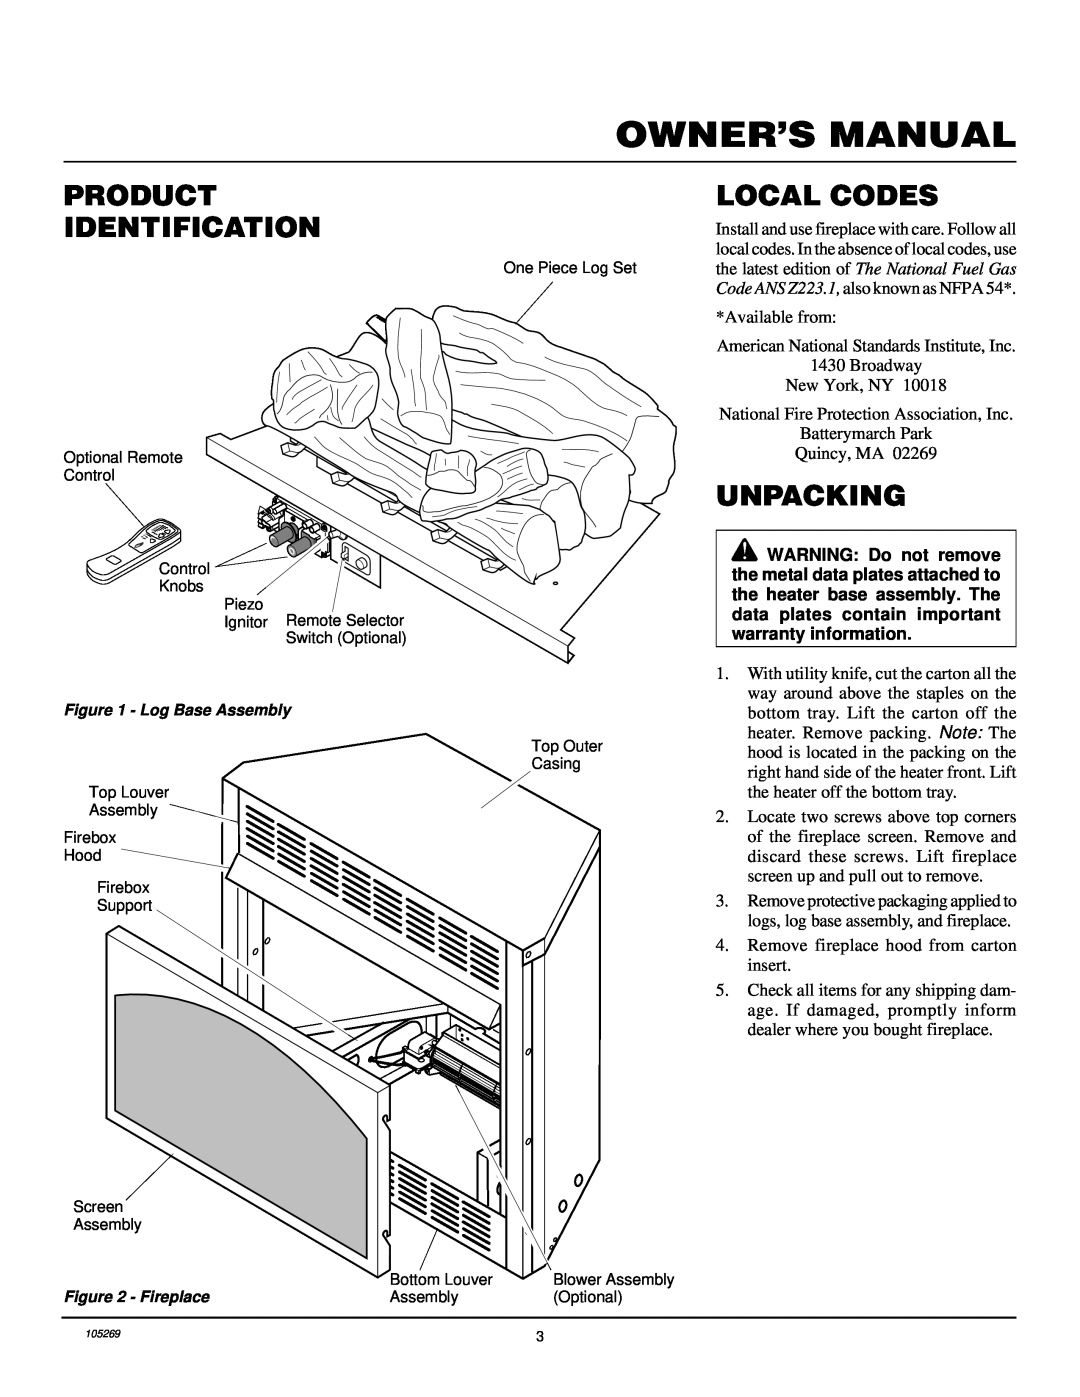 Vanguard Heating VYGF33NRA installation manual Product Identification, Local Codes, Unpacking 